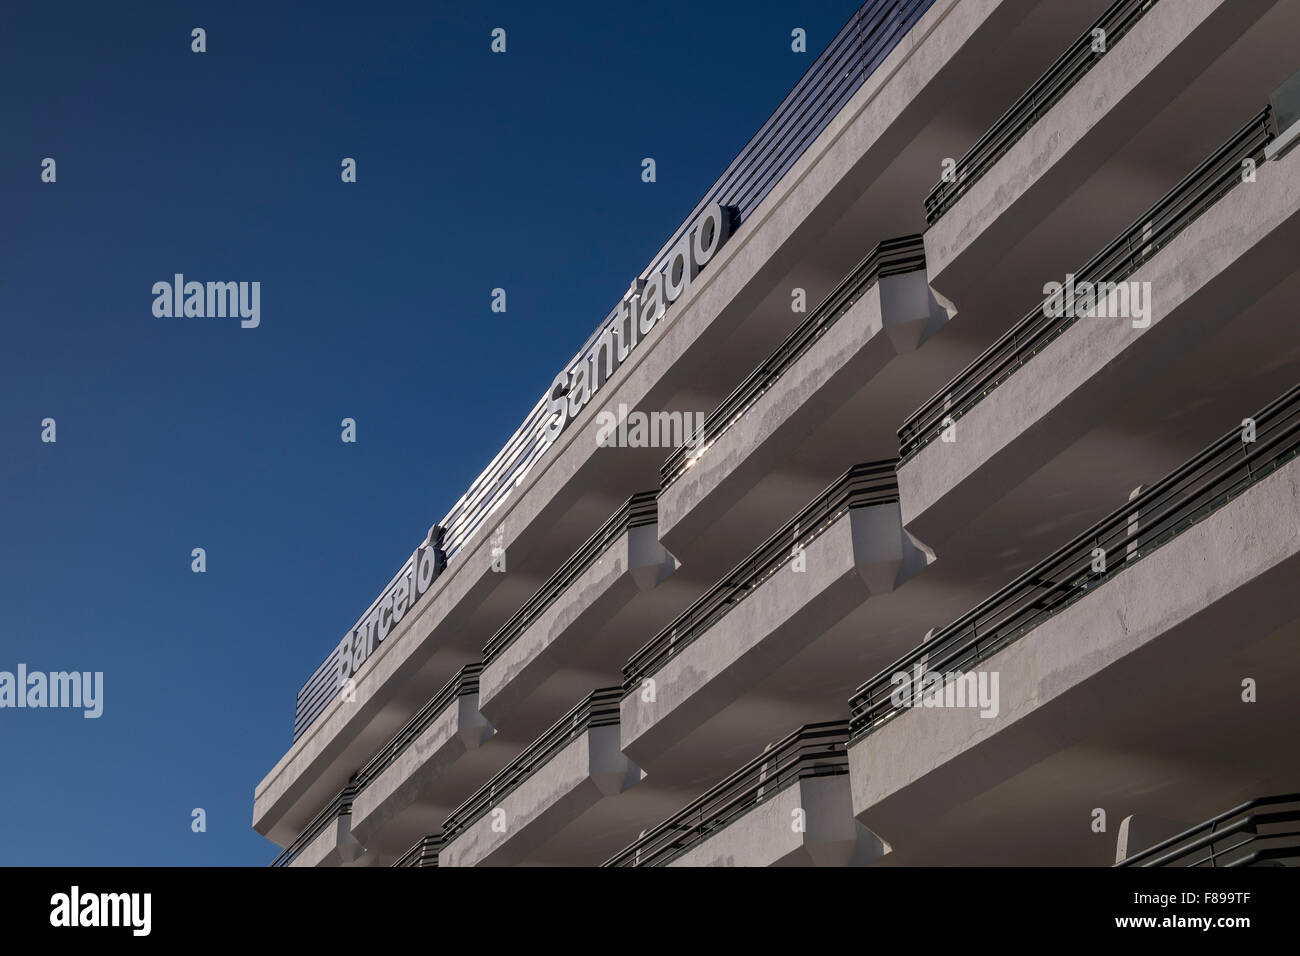 Looking up at the balconies of the Barcelo Santiago Hotel in Puerto Santiago, Teneife, Canary Islands, Spain. Stock Photo